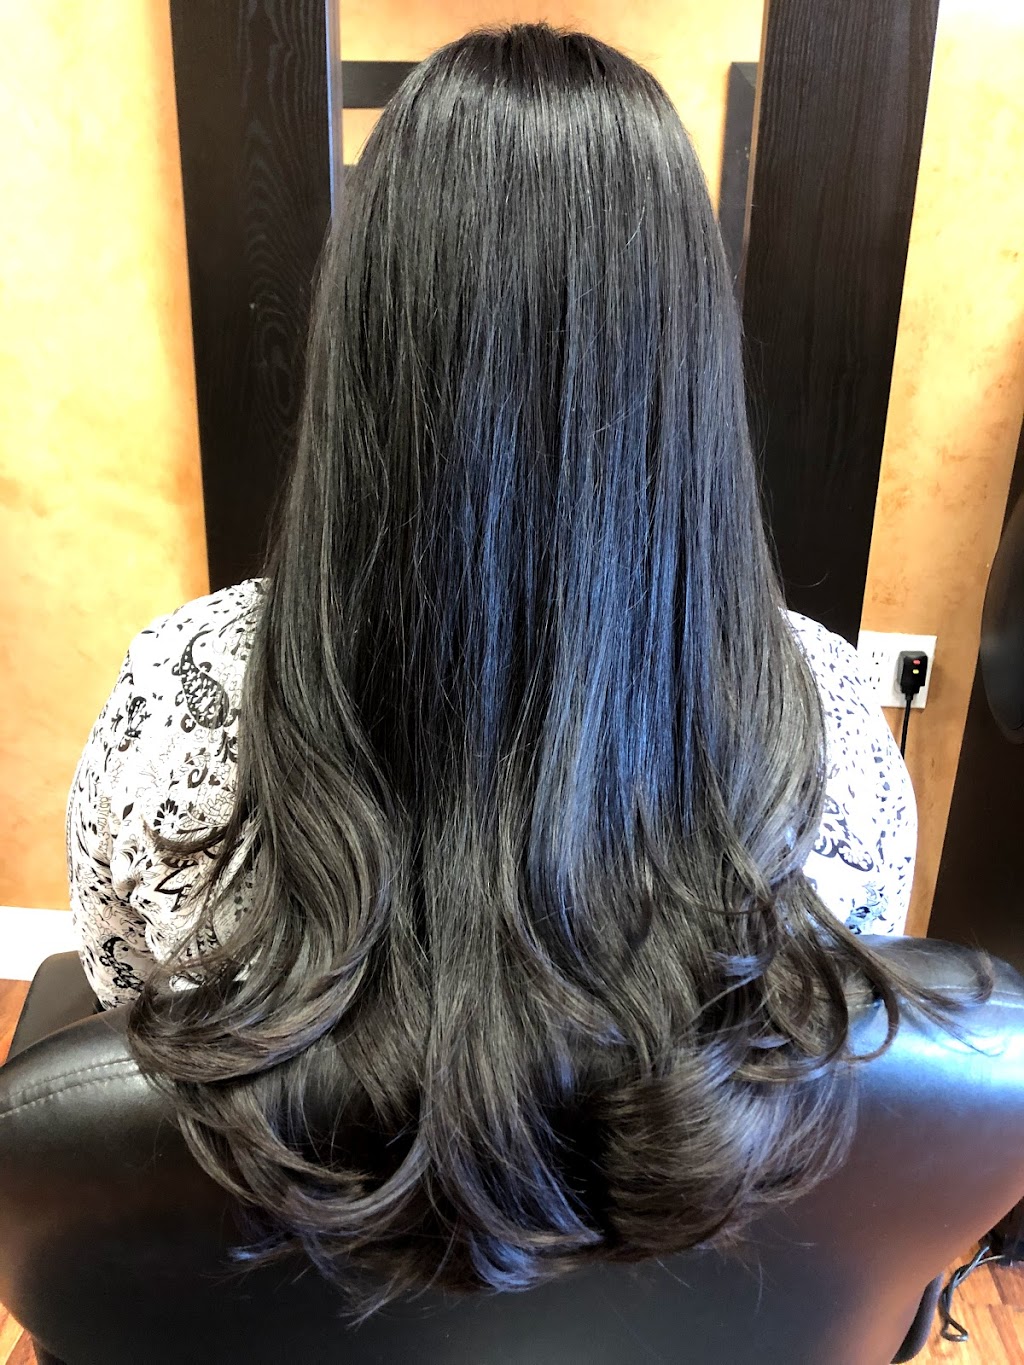 Belle Vie Hair Studio | 644 Middle Country Rd ste c, Selden, NY 11784 | Phone: (631) 846-7428